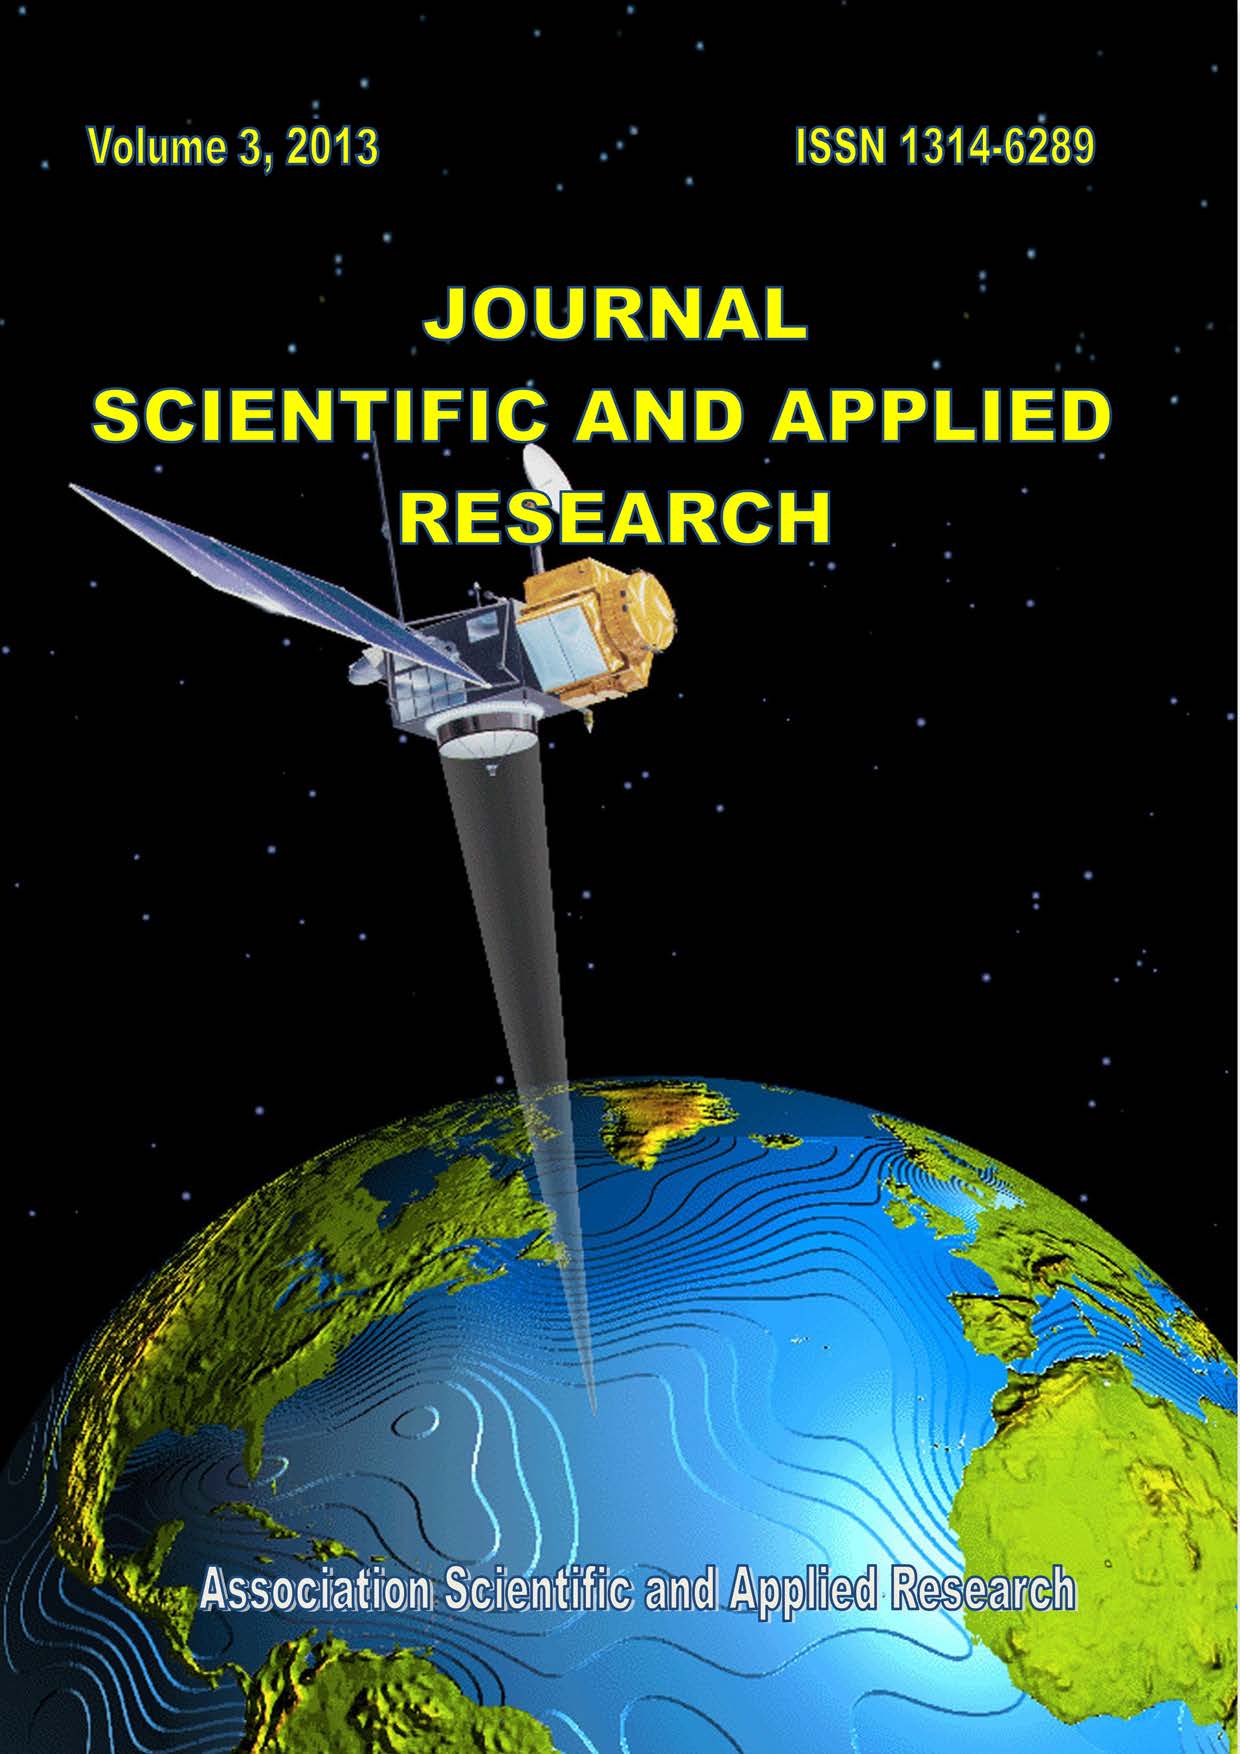 					View Vol. 3 No. 1 (2013): Journal Scientific and Applied Research
				